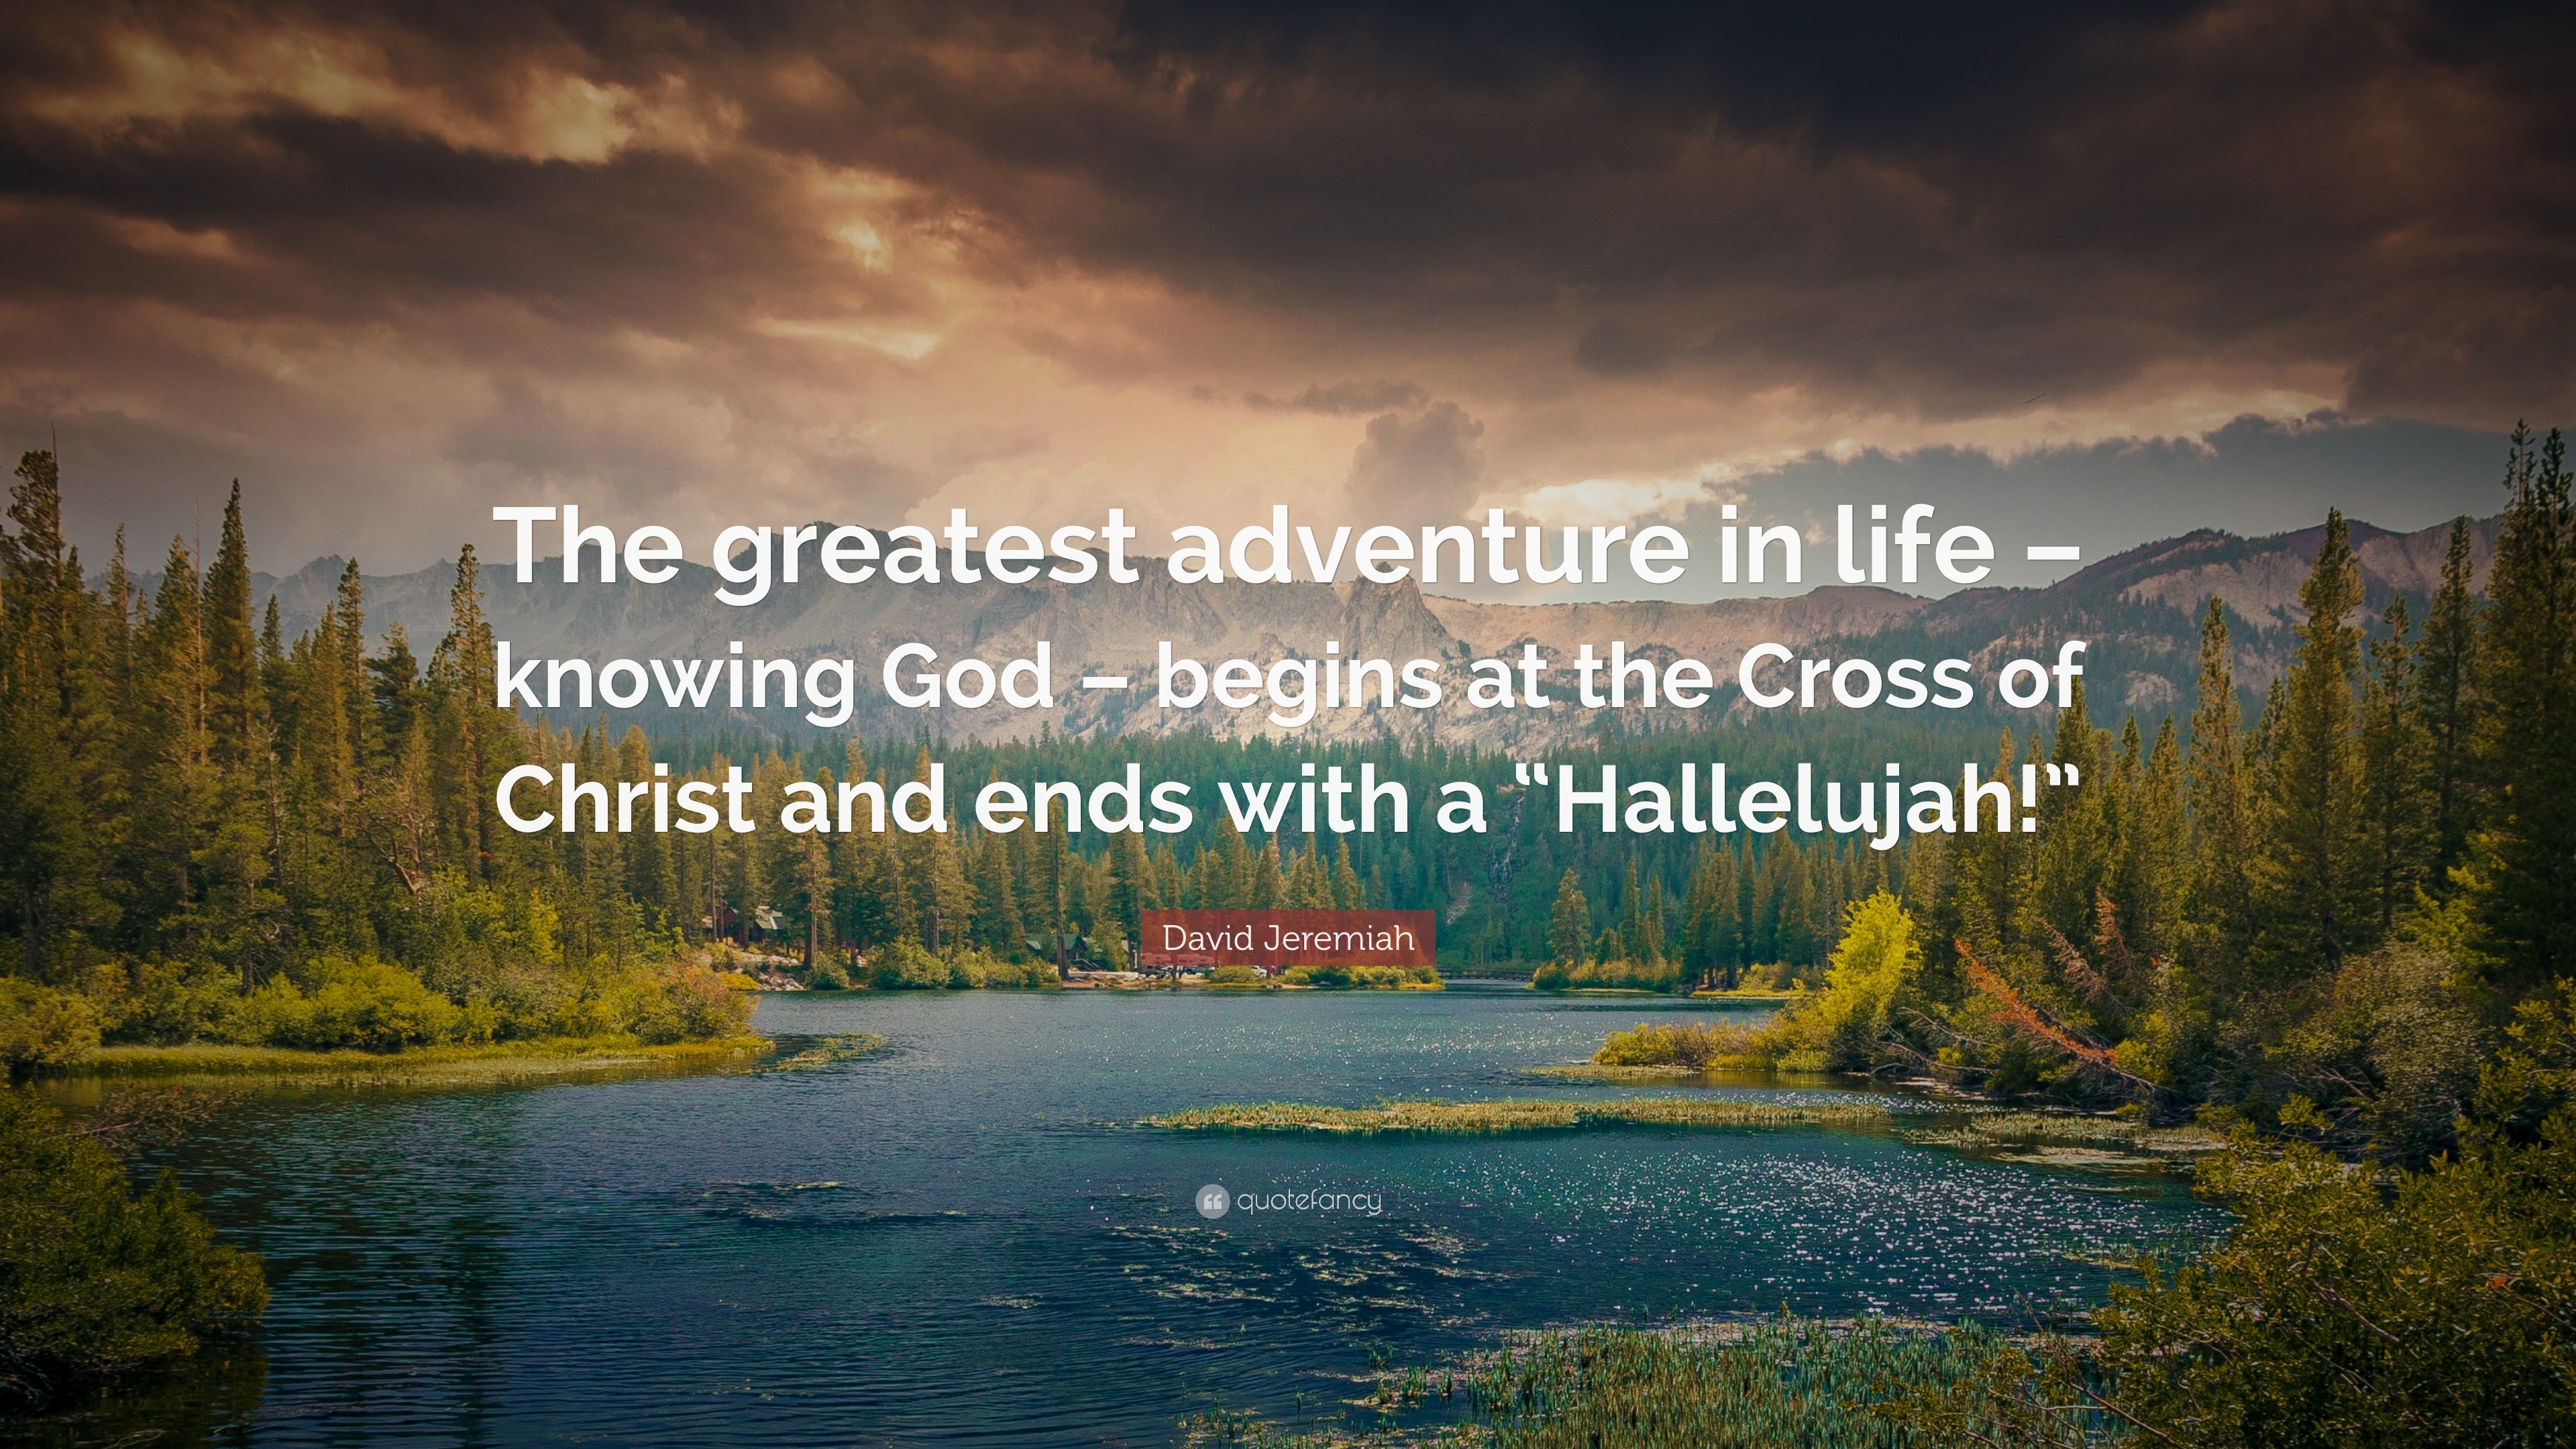 3840x2160 David Jeremiah Quote: “The greatest adventure in life – knowing God –  begins at